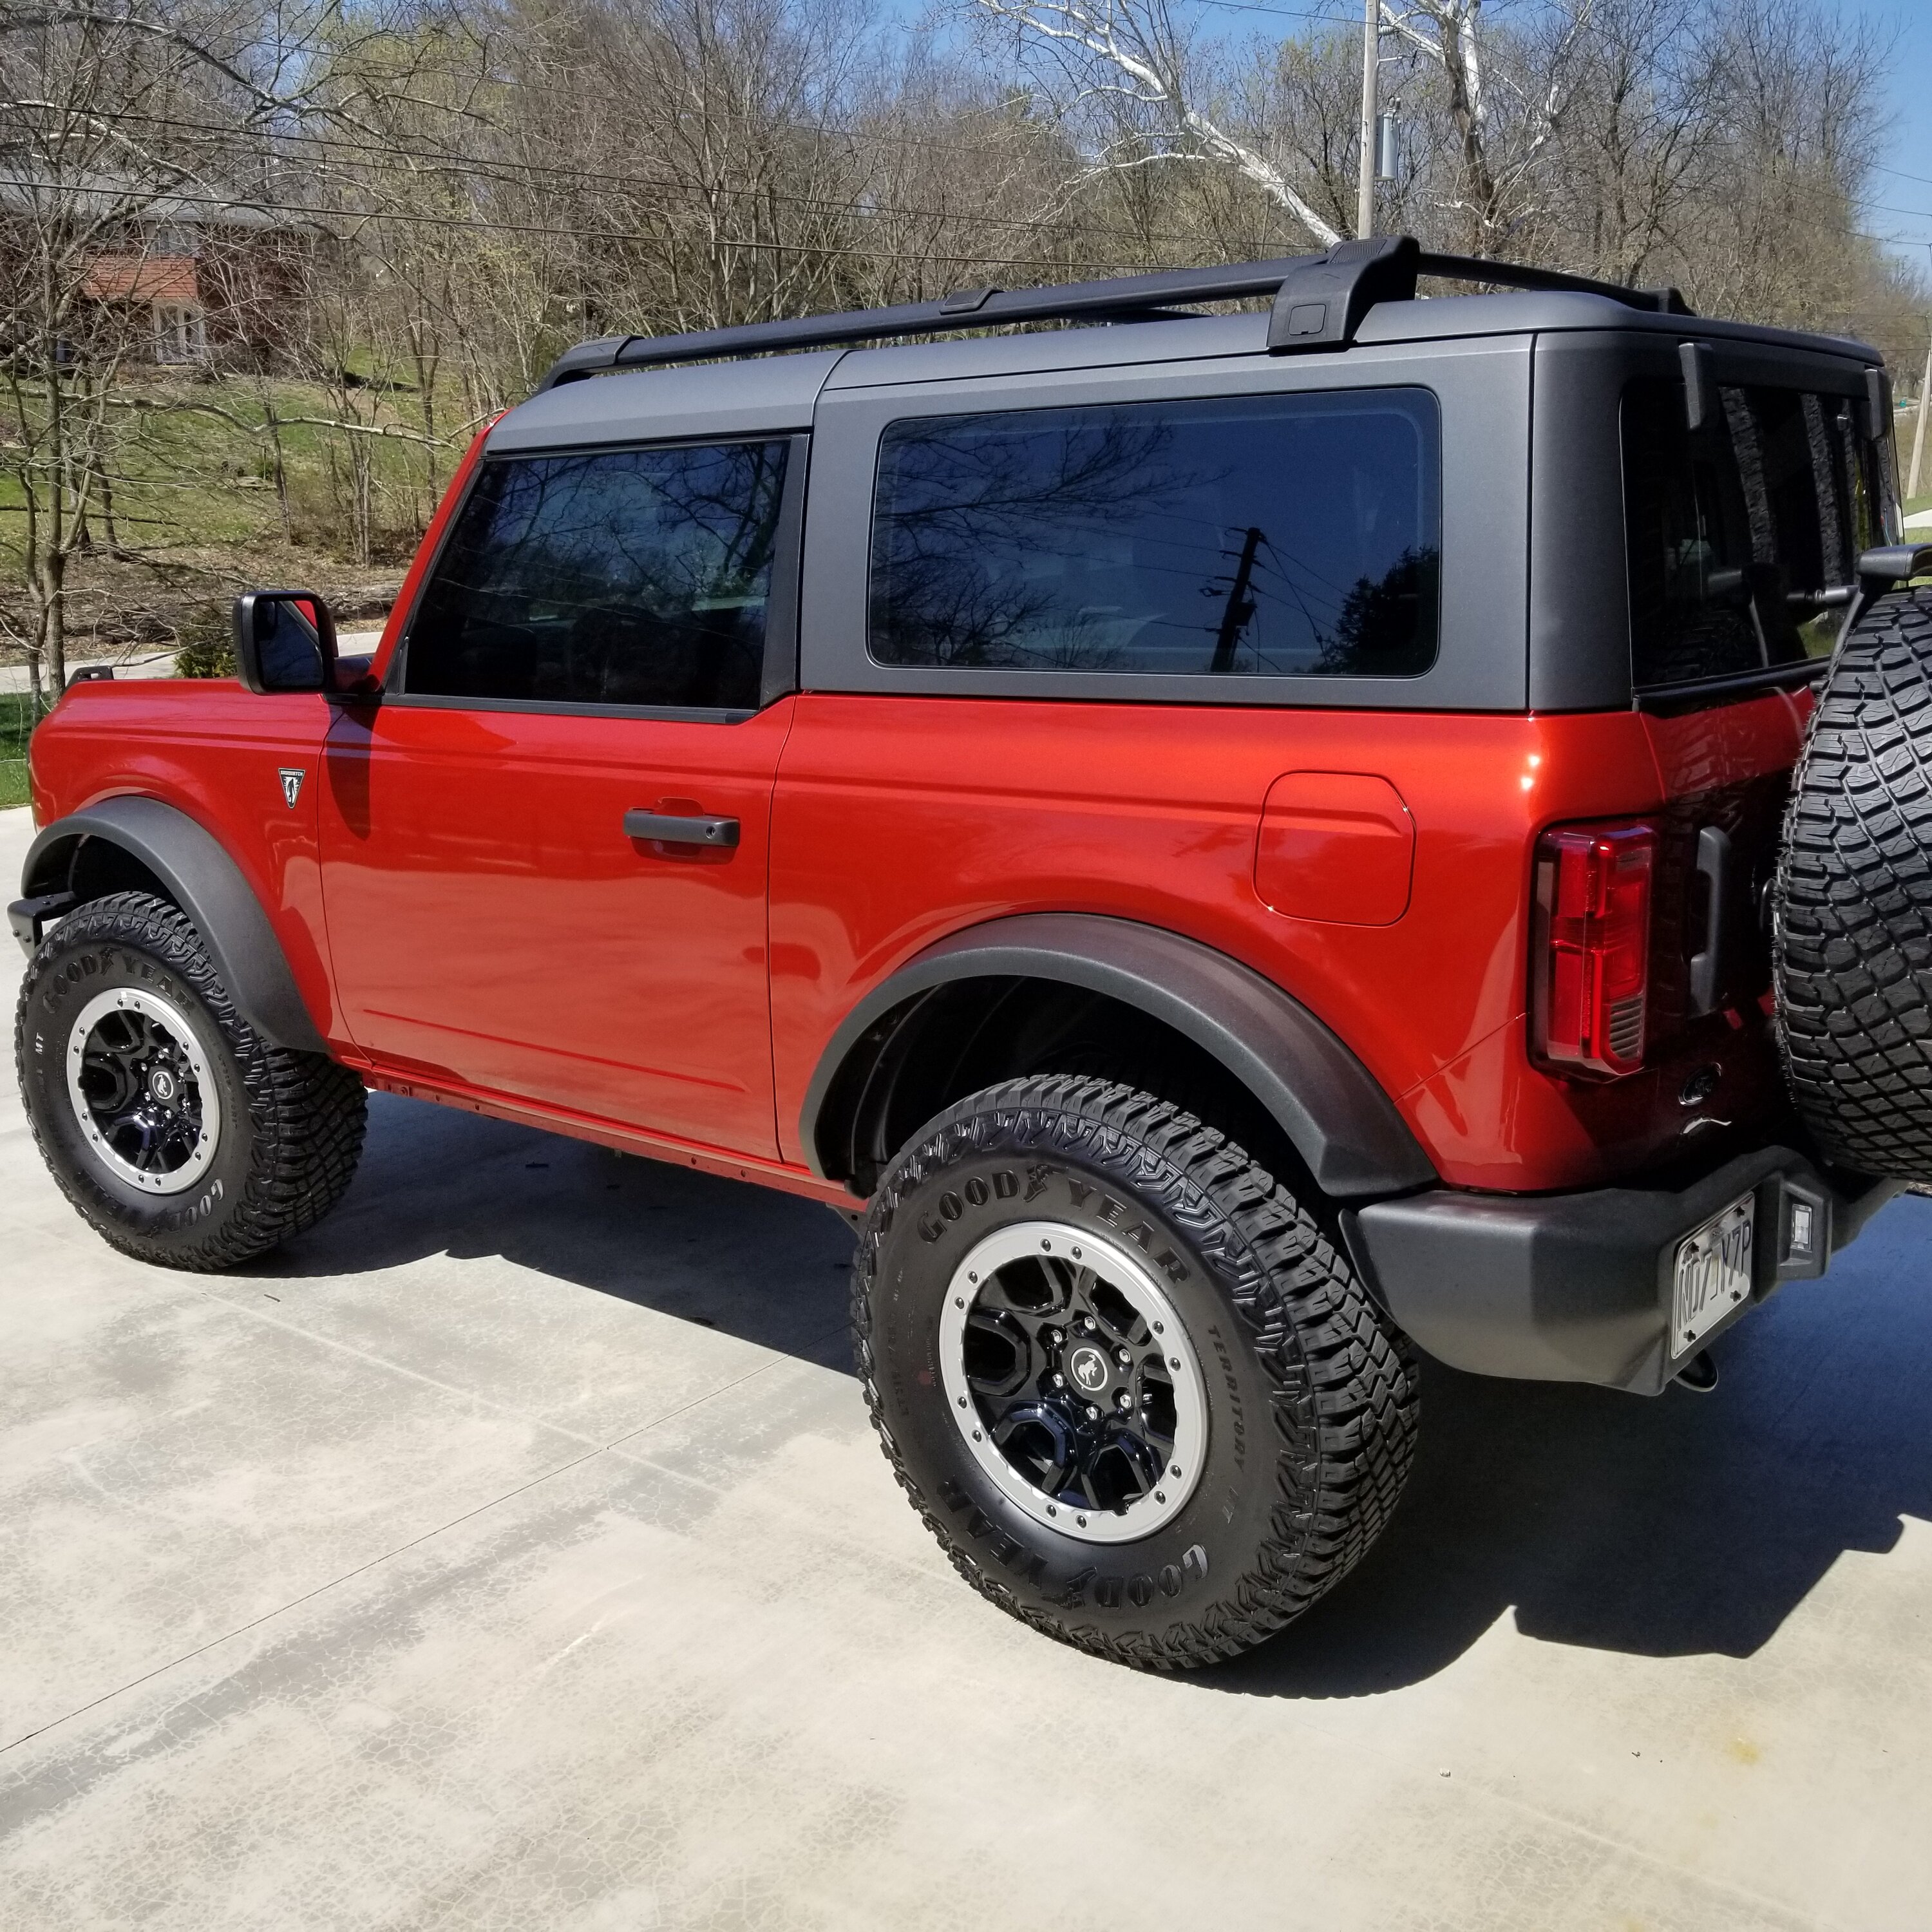 Ford Bronco Ceramic coating??  Any good?  Cost?  Opinions?? Etc 20230329_133539